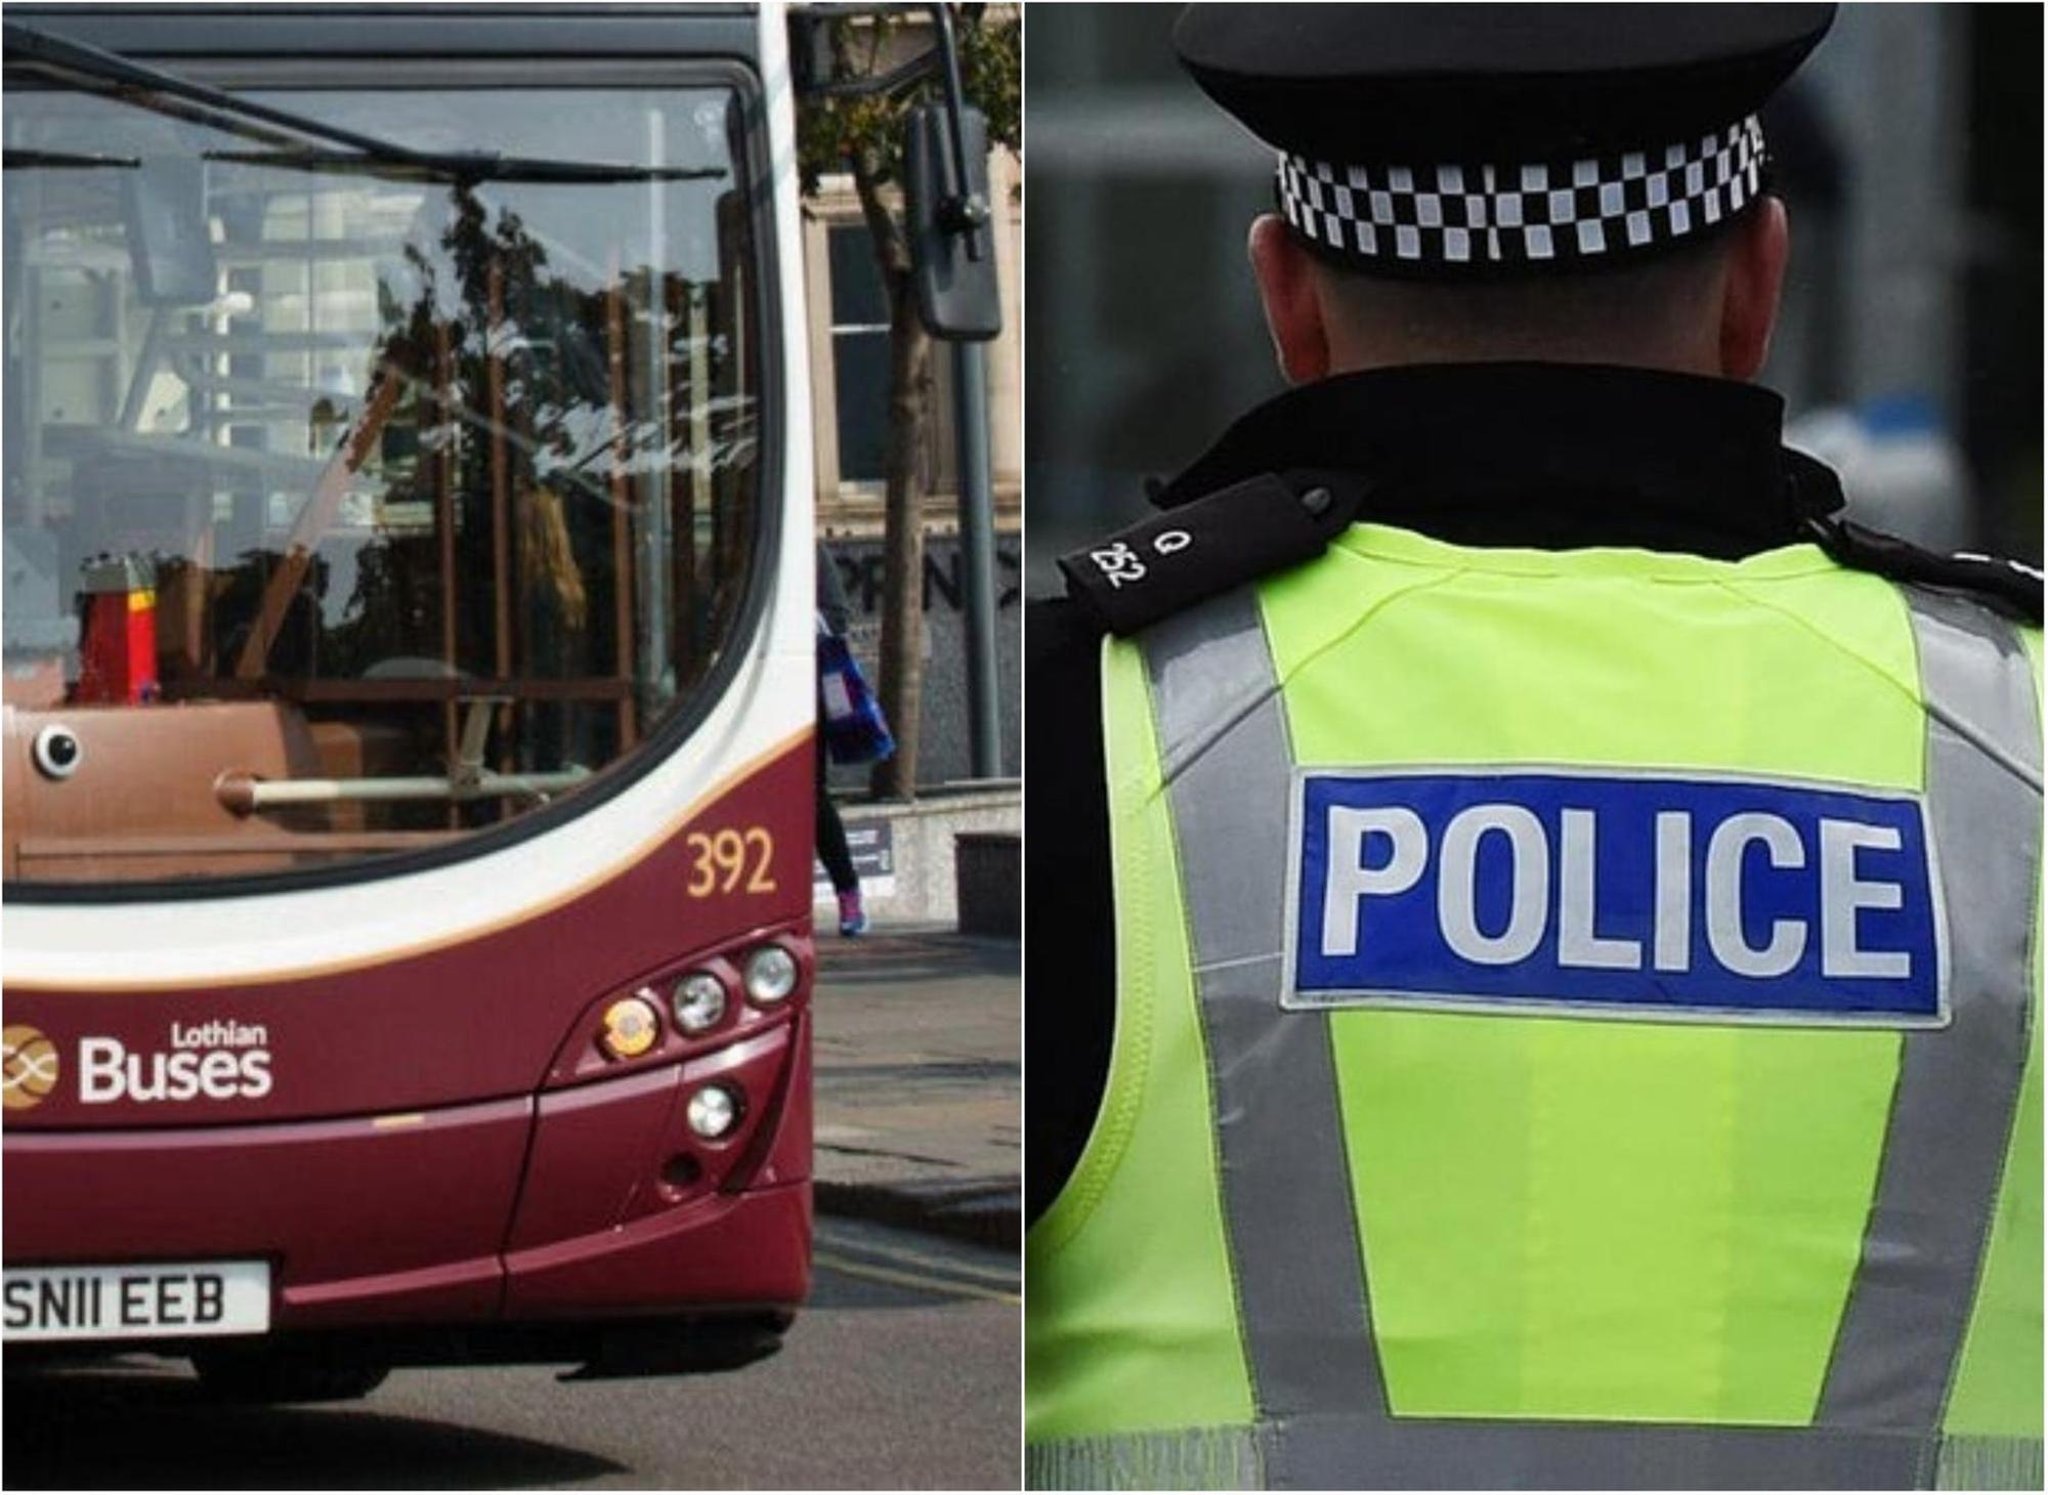 Locals blast 'horrible thugs' for window smashing in the Edinburgh area after same bus route attacked twice in one night